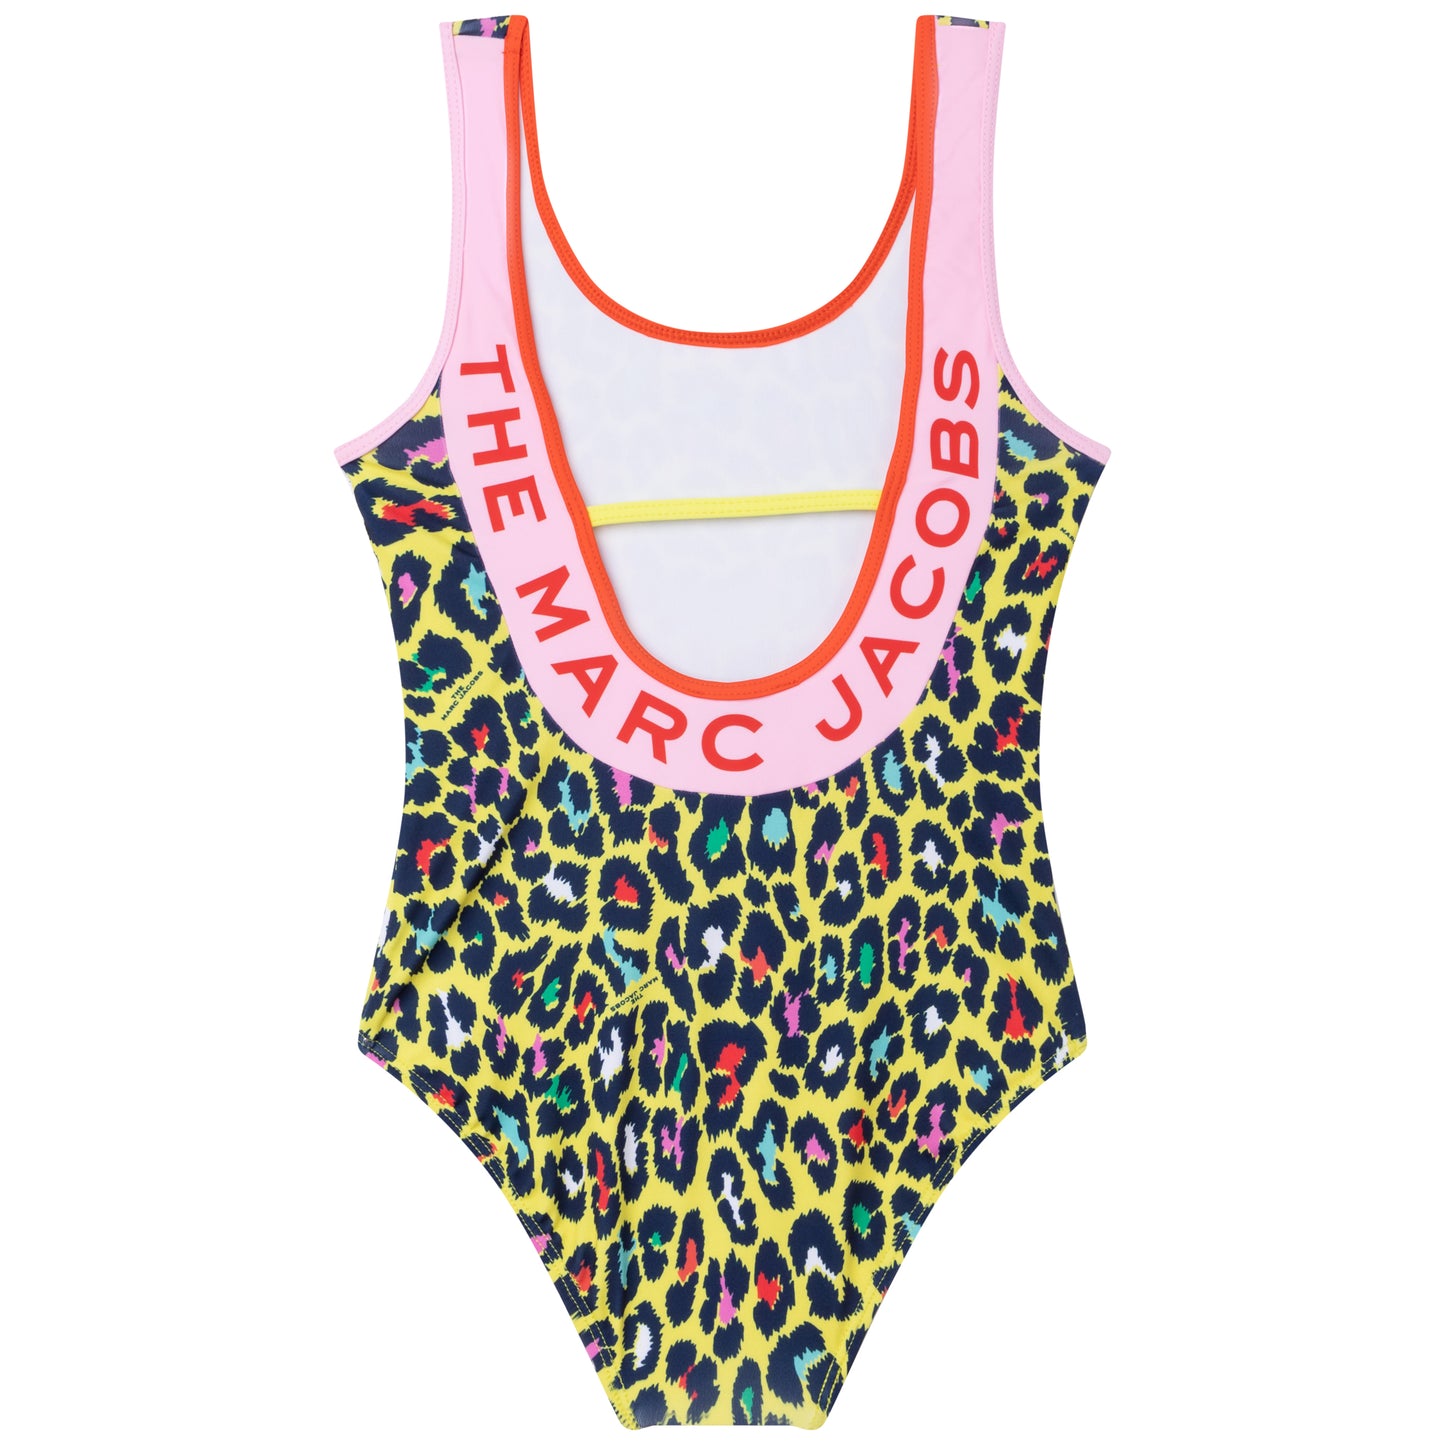 The Marc Jacobs Cheetah Swimsuit